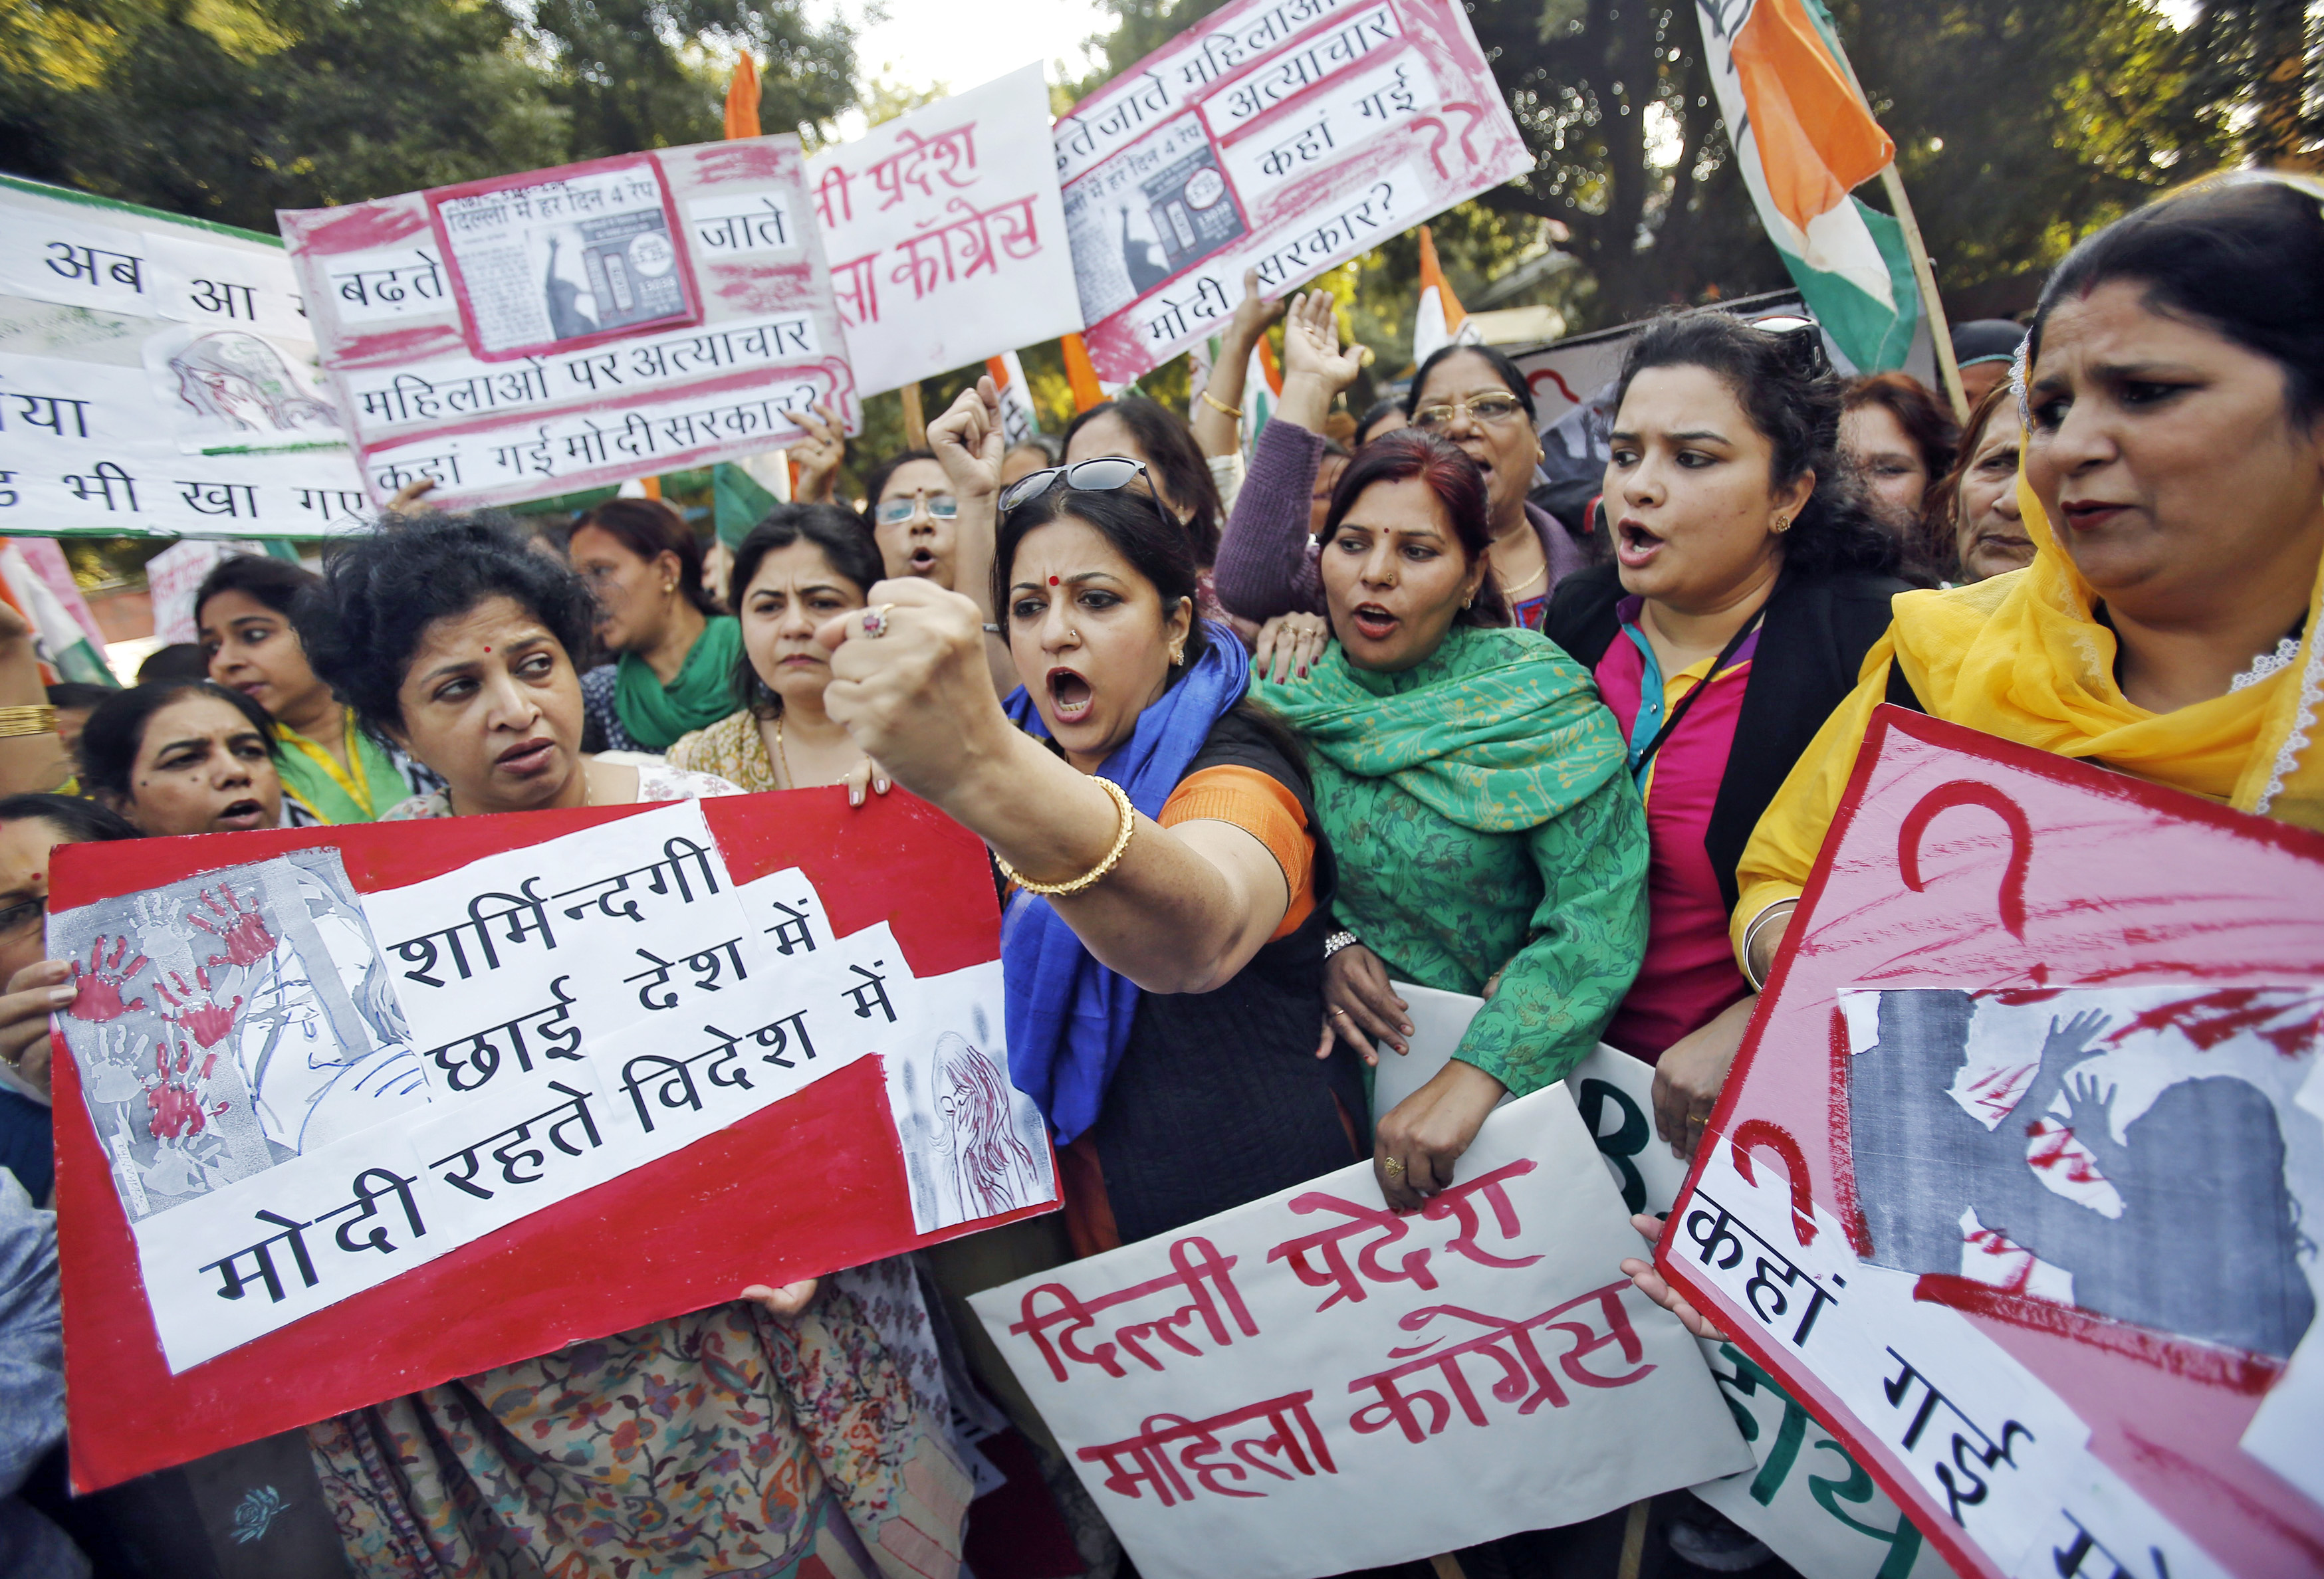 Members of All India Mahila Congress, women's wing of Congress party, shout slogans and carry placards during a protest against the alleged rape of a female Uber passenger, in New Delhi on Dec. 8, 2014 (Anindito Mukherjee—Reuters)